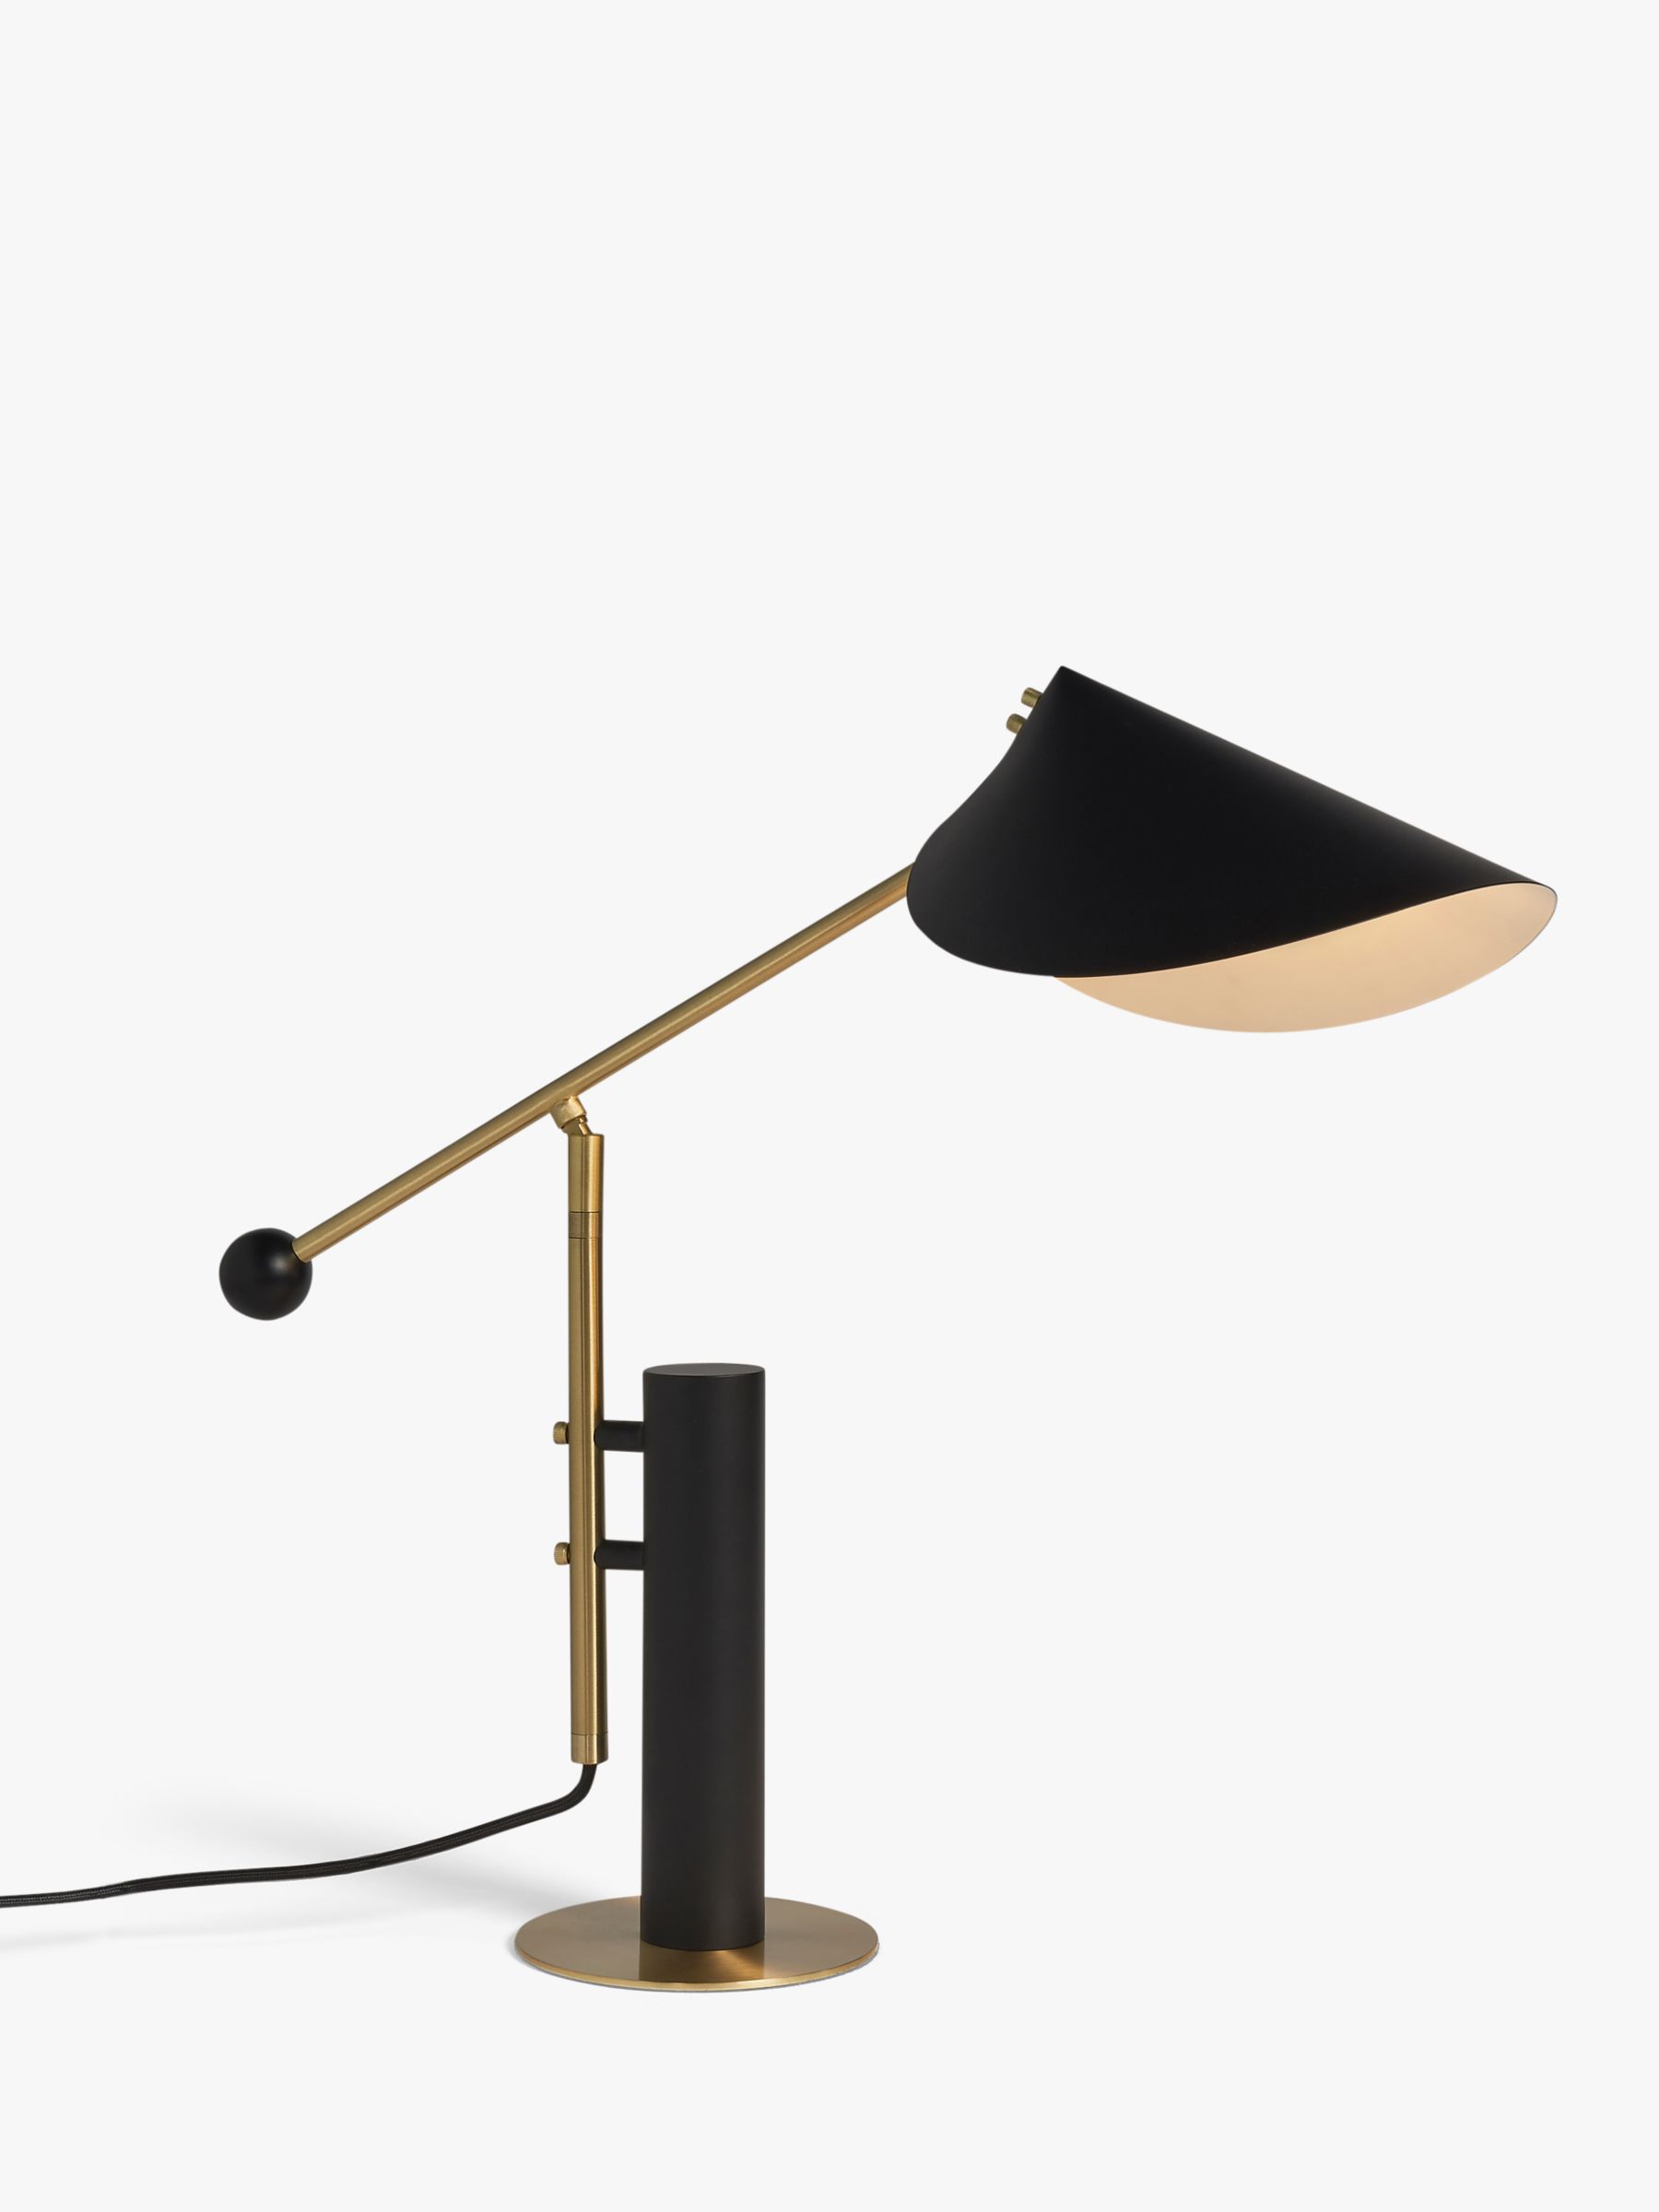 Partners Leaf Black Table Lamp Brass, Black And Brass Table Lamp